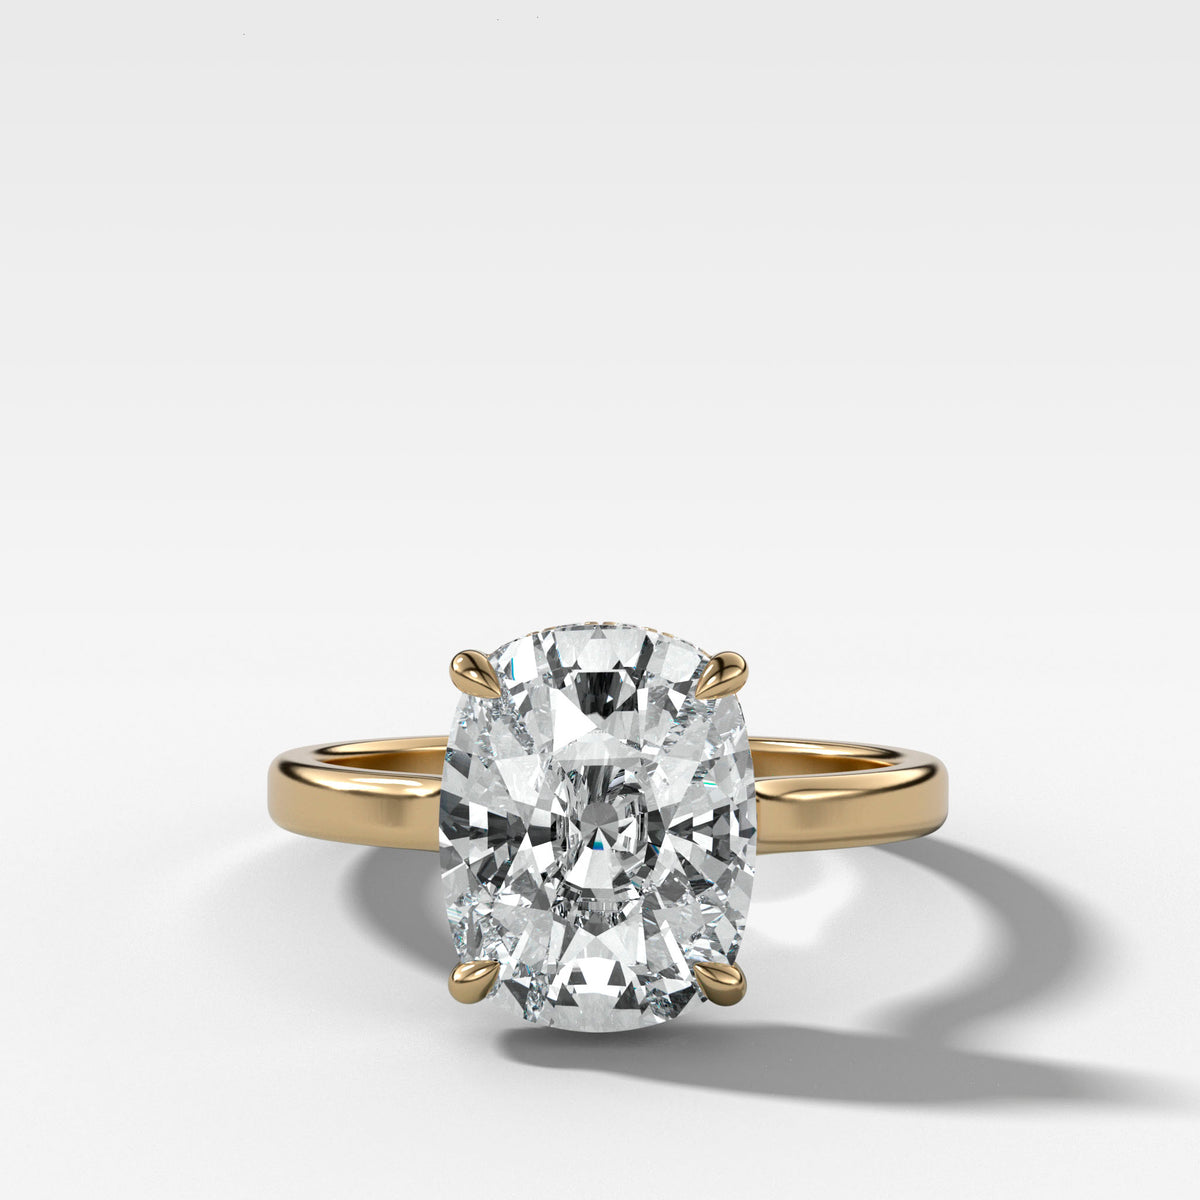 Compass Solitaire Engagement Ring with Elongated Cushion Cut Diamond